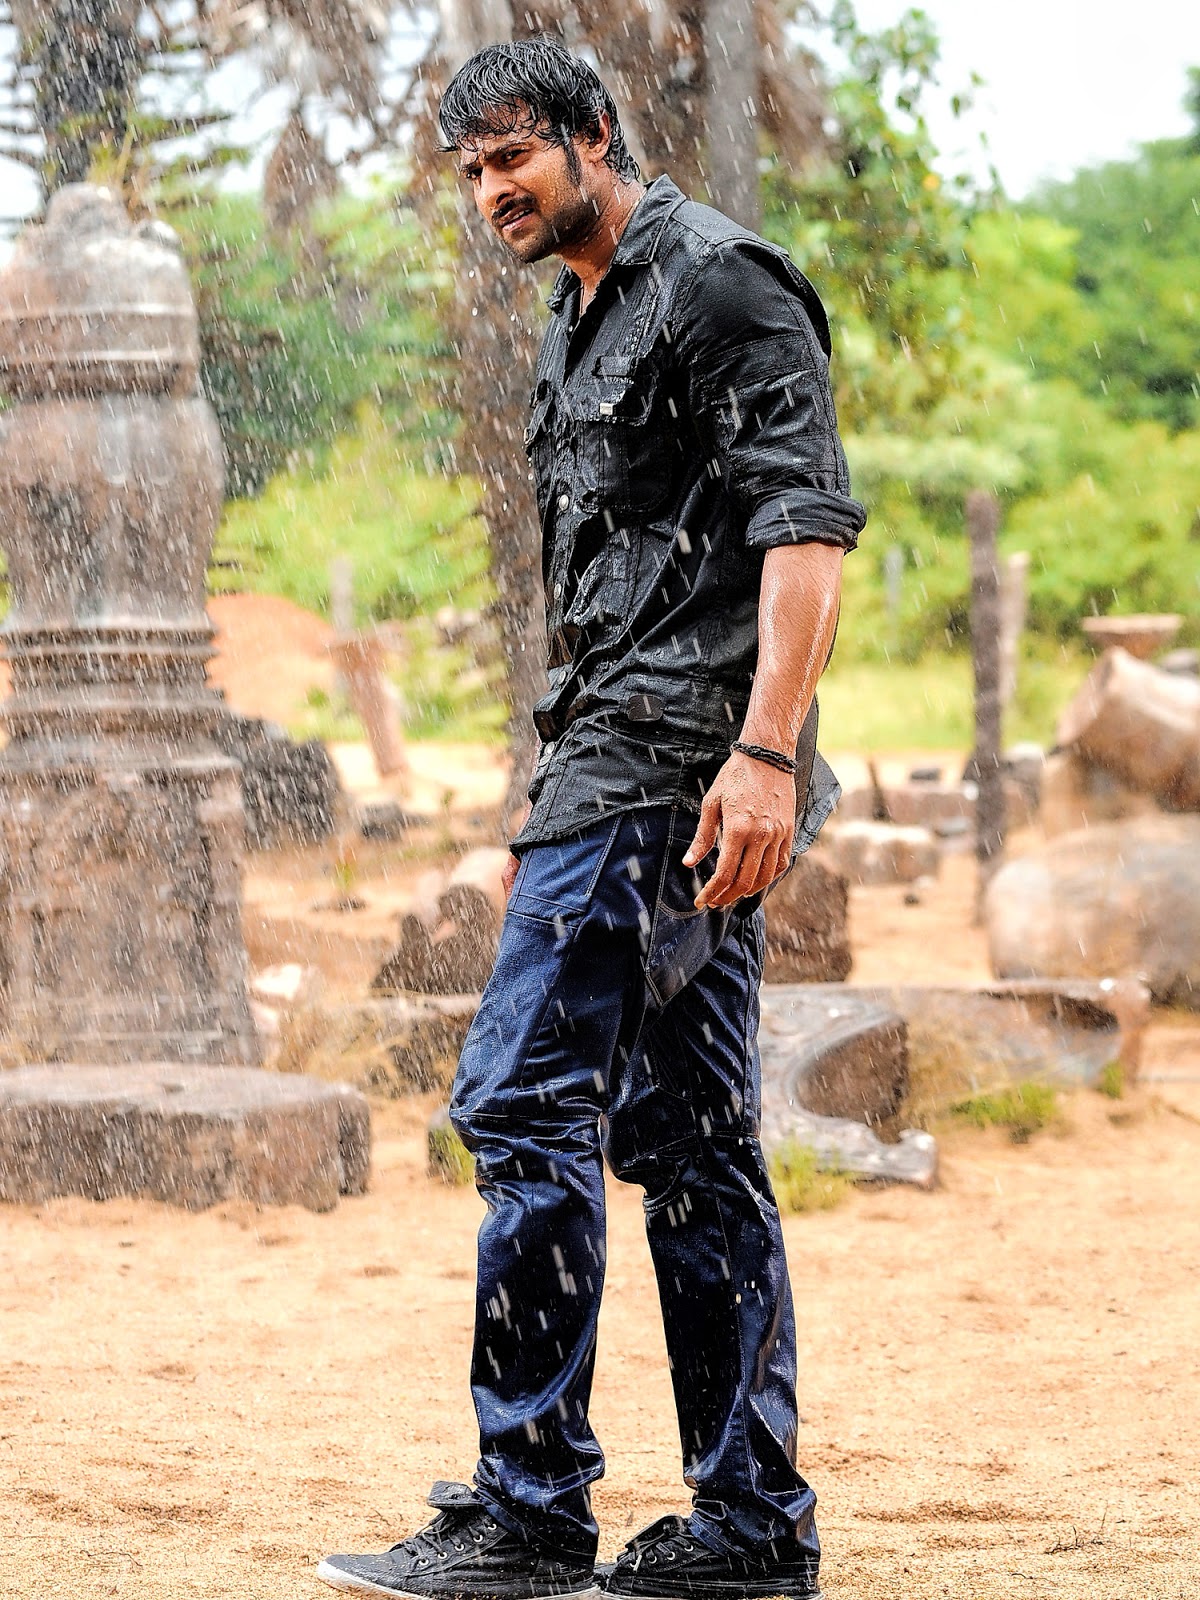 prabhas hd wallpapers,standing,outerwear,muscle,jeans,personal protective equipment